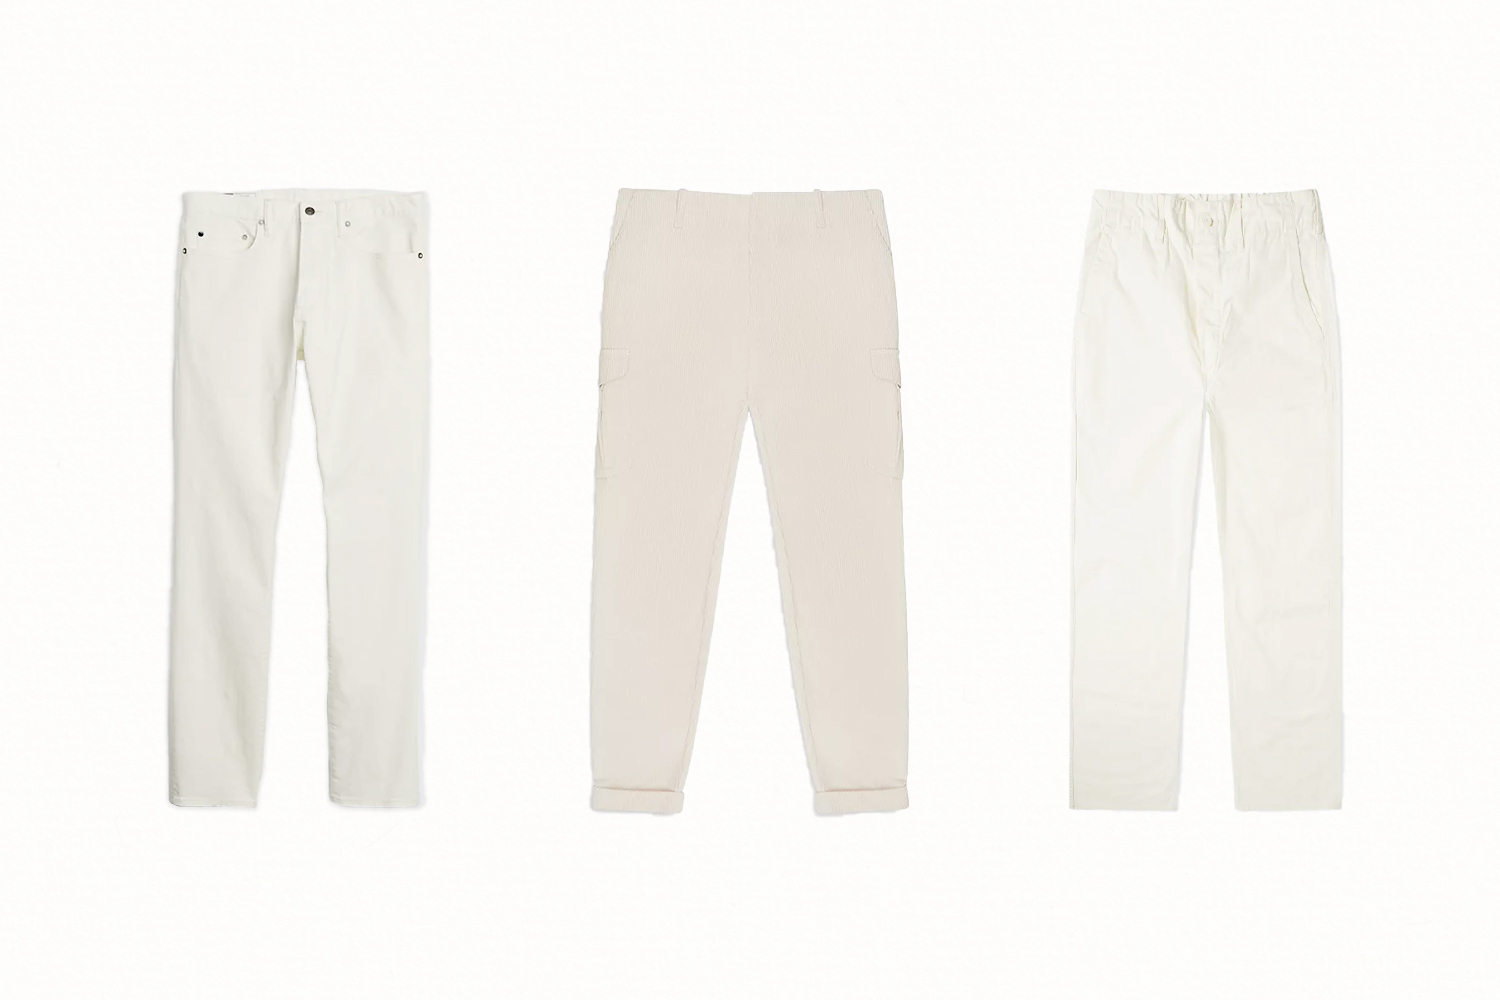 The 8 Best Pairs of White Pants to Wear in Winter 2021 - InsideHook